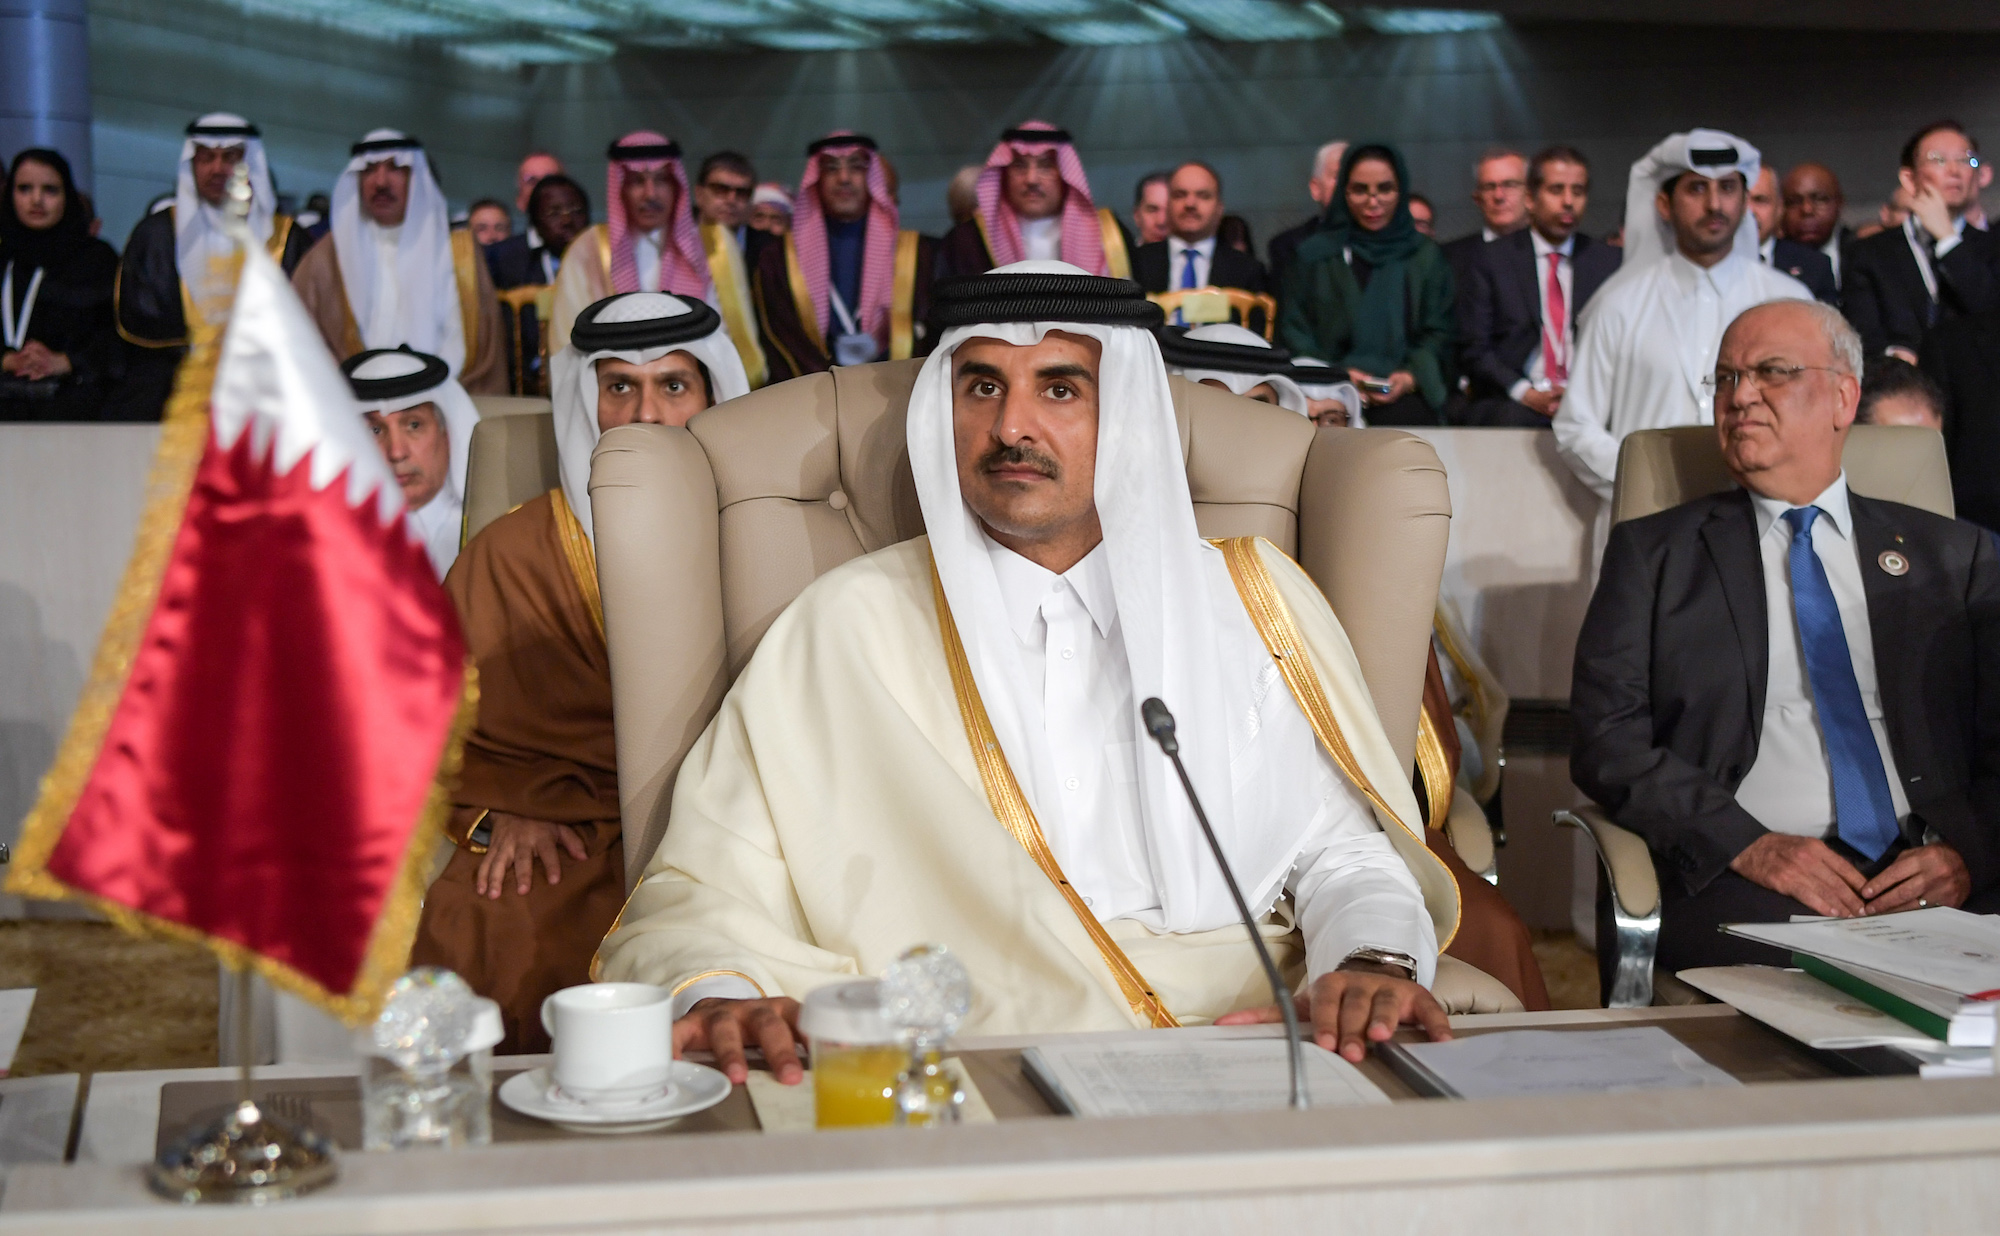 Qatari Emir Sheikh Tamim bin Hamad Al-Thani is seen at the opening session of the Arab League in Tunisia on March 31, 2019.